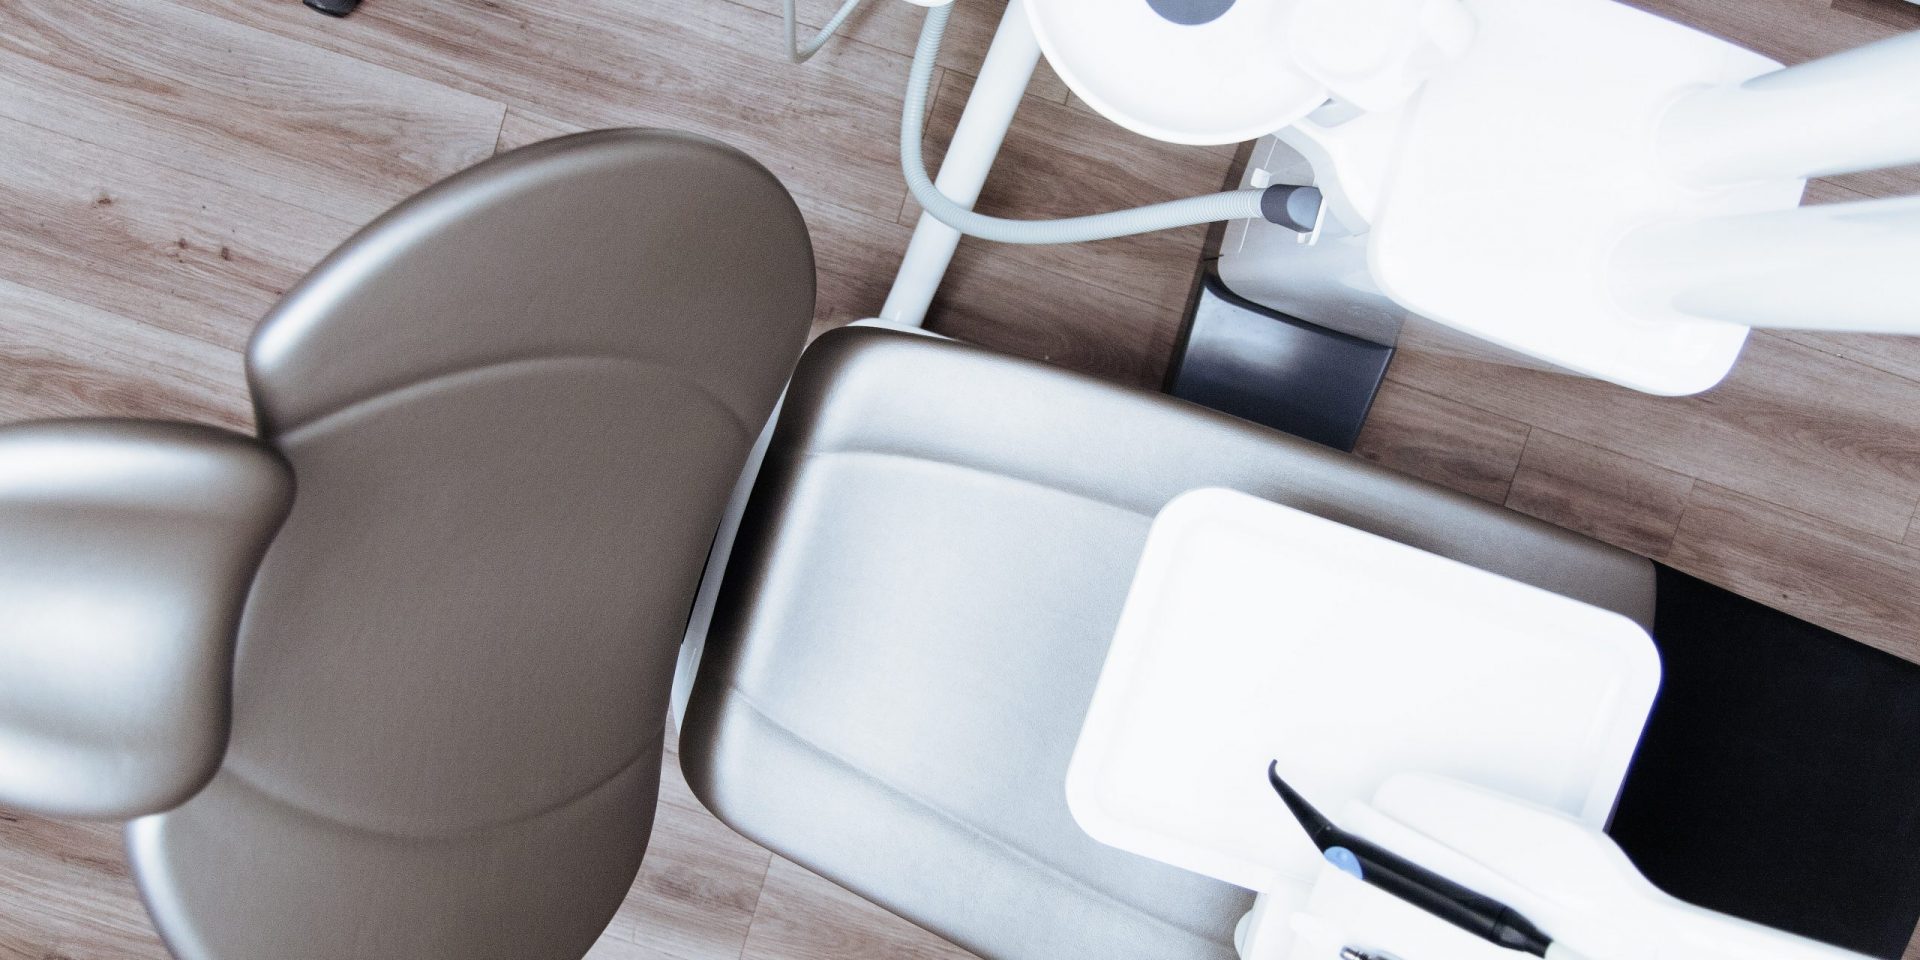 Dental Operation Chair and Dental Equipment